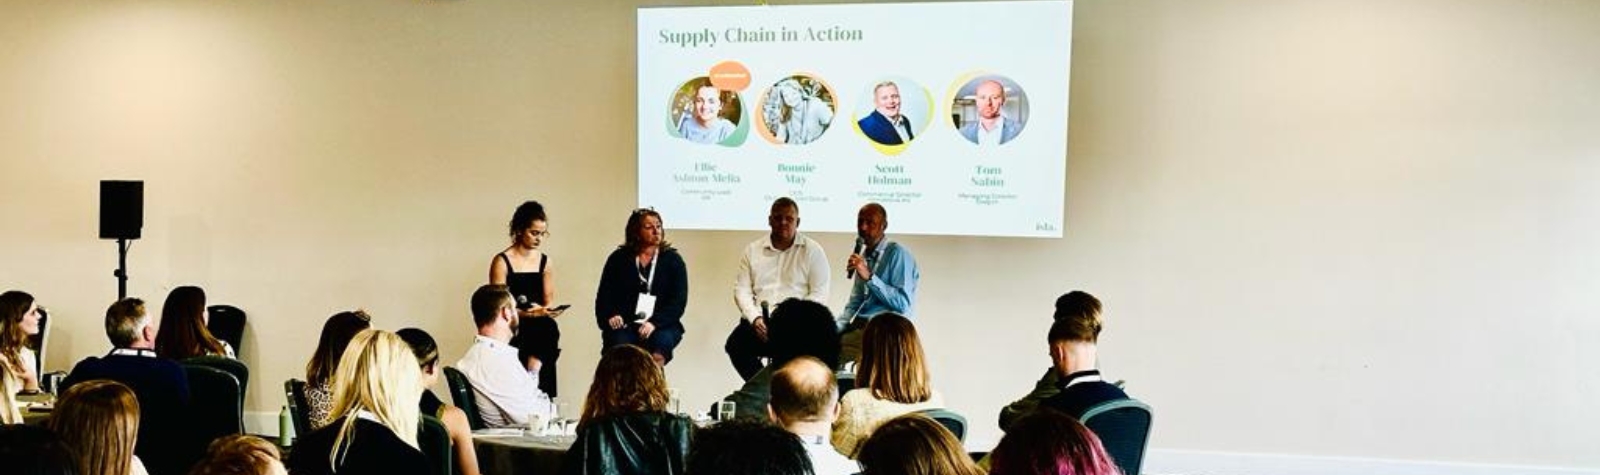 Promoting sustainability in the supply chain